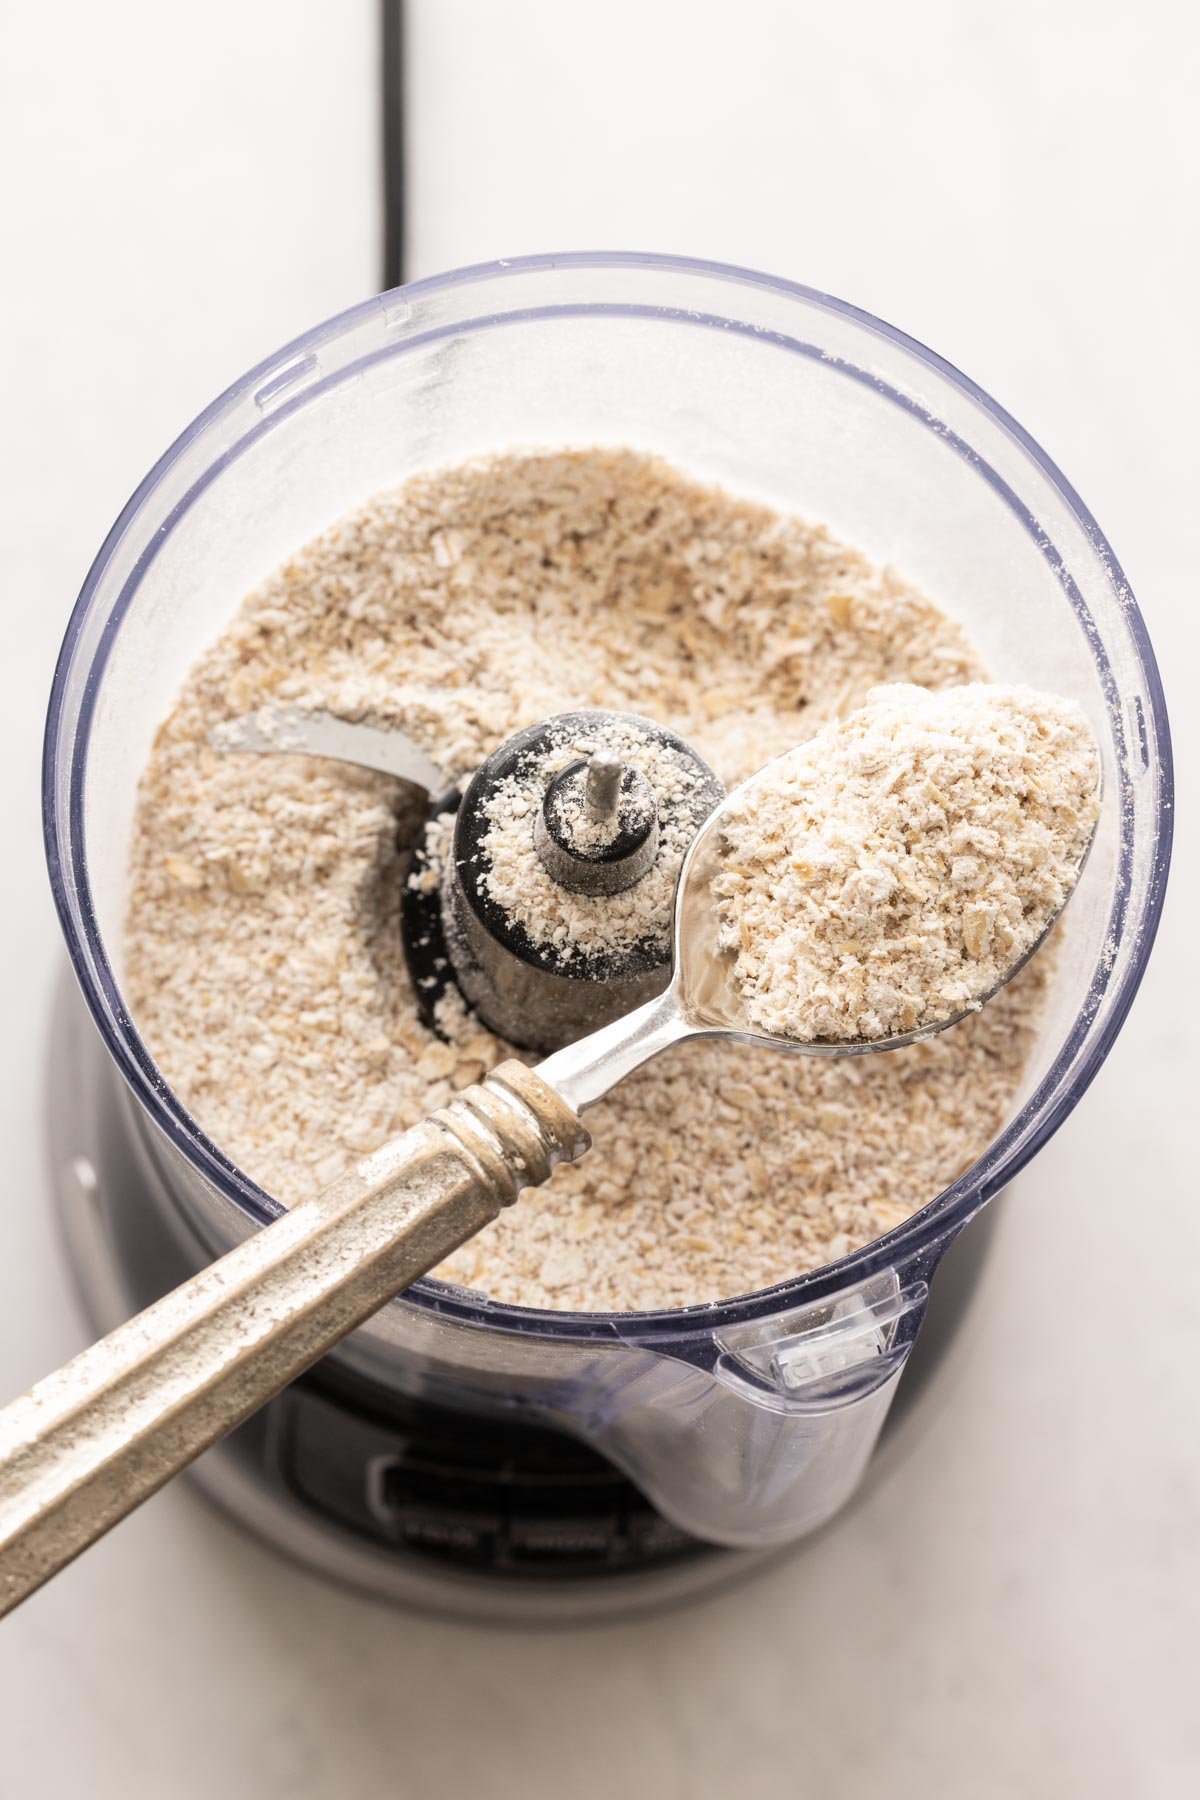 Oats in a mini food processor with a spoon